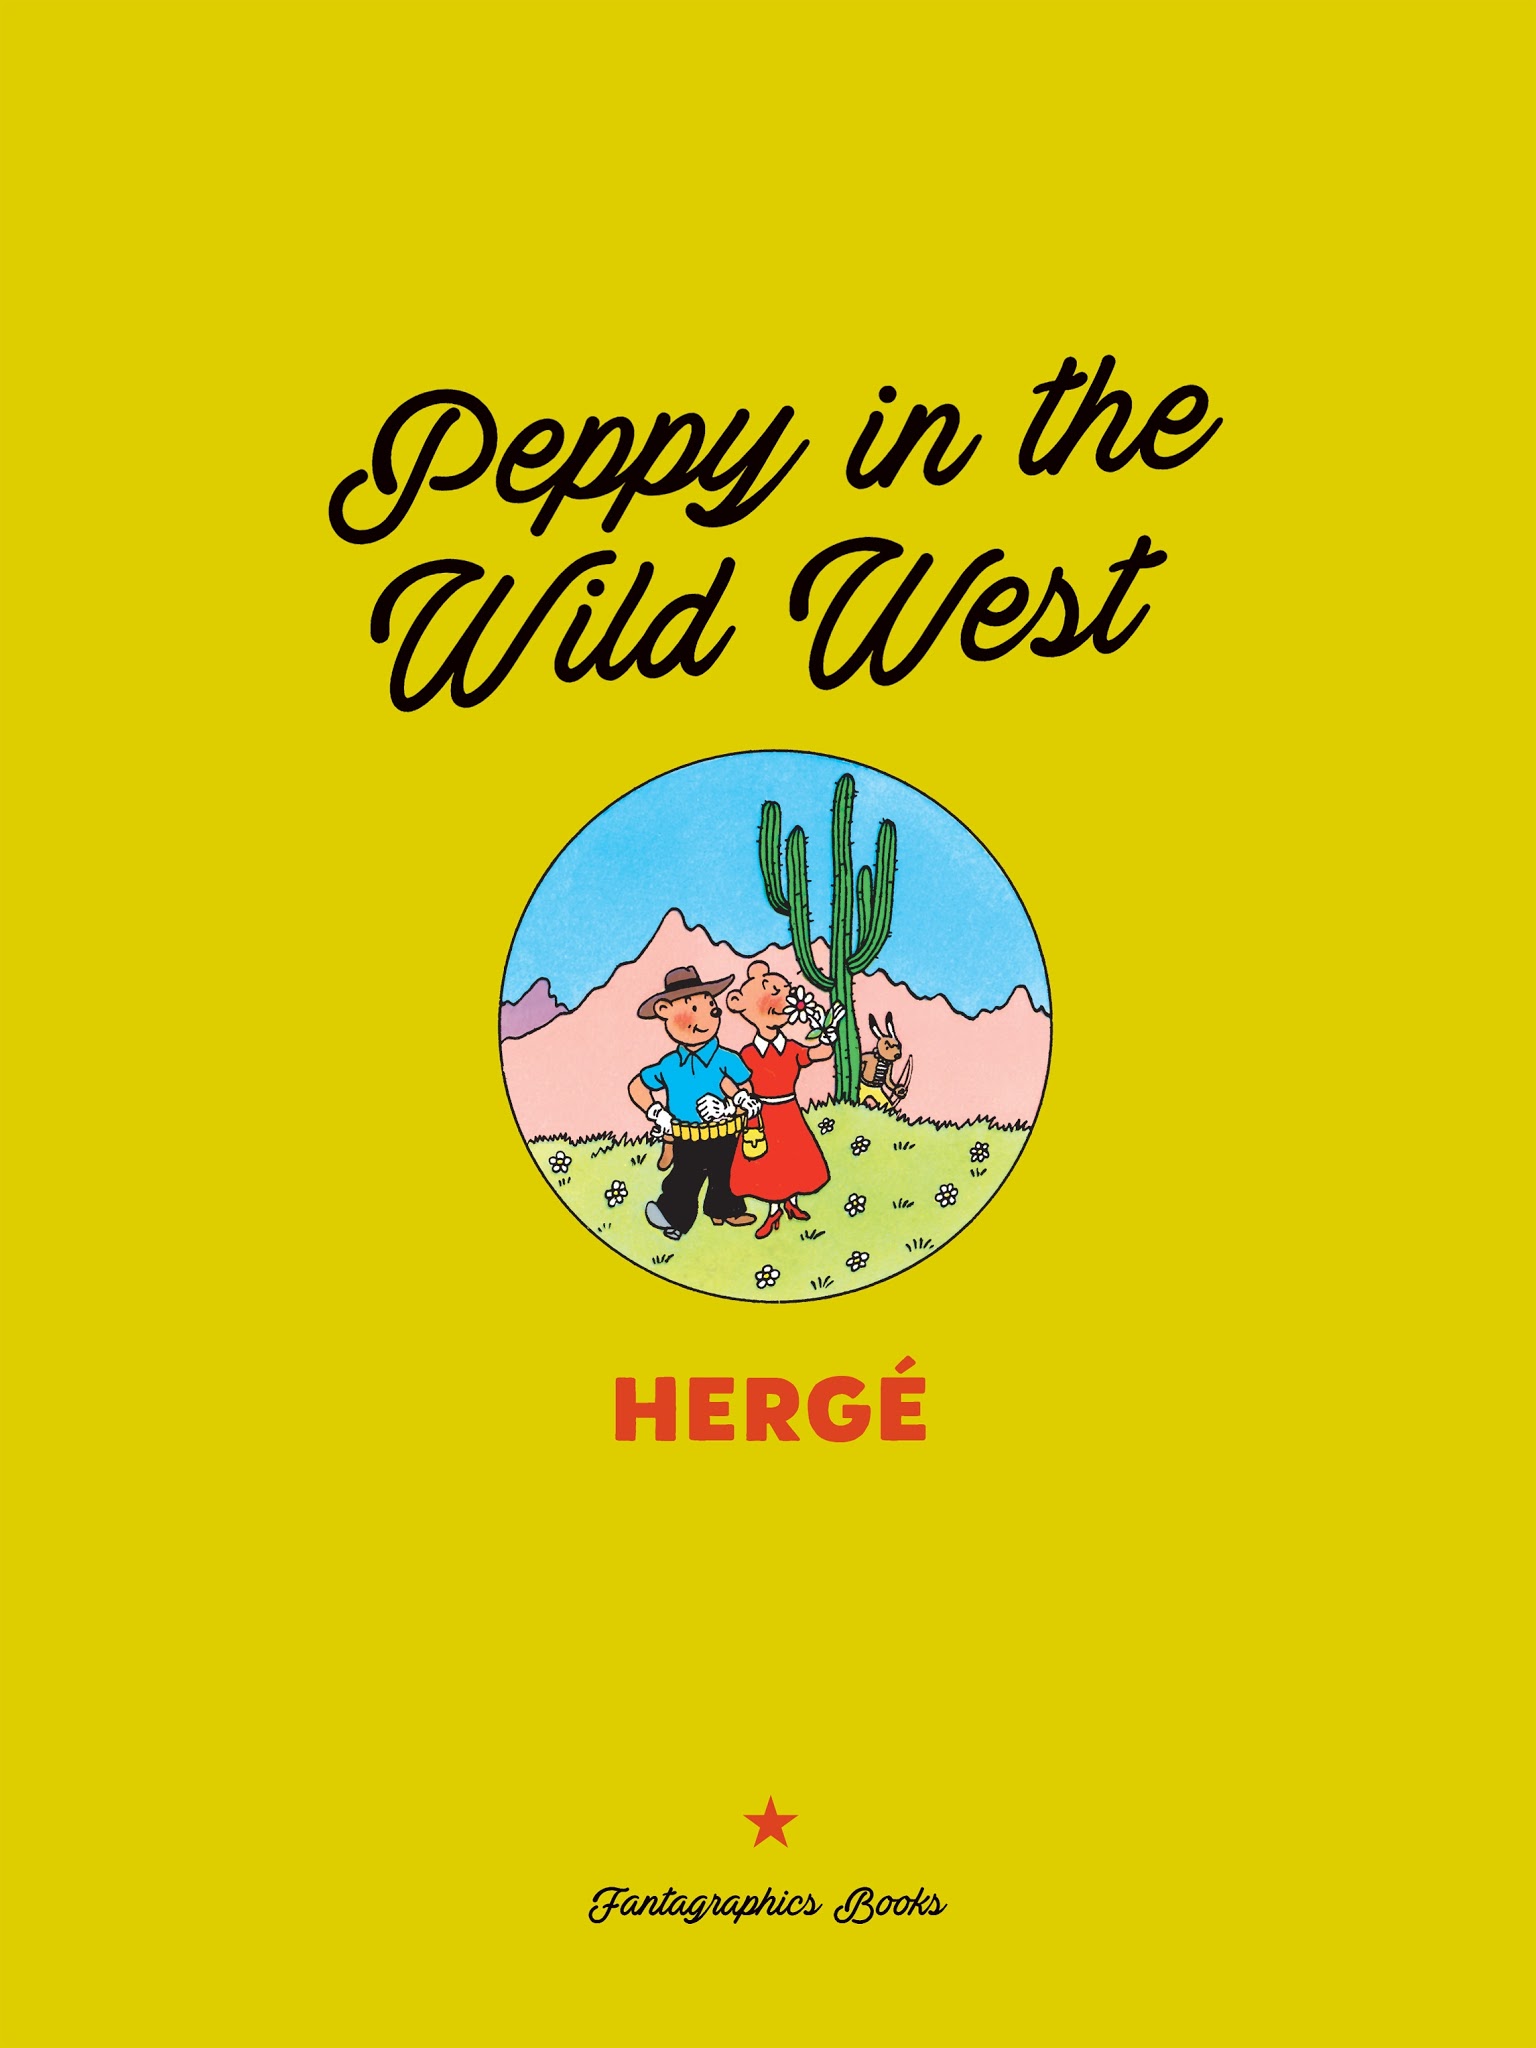 Read online Peppy in the Wild West comic -  Issue # TPB - 2